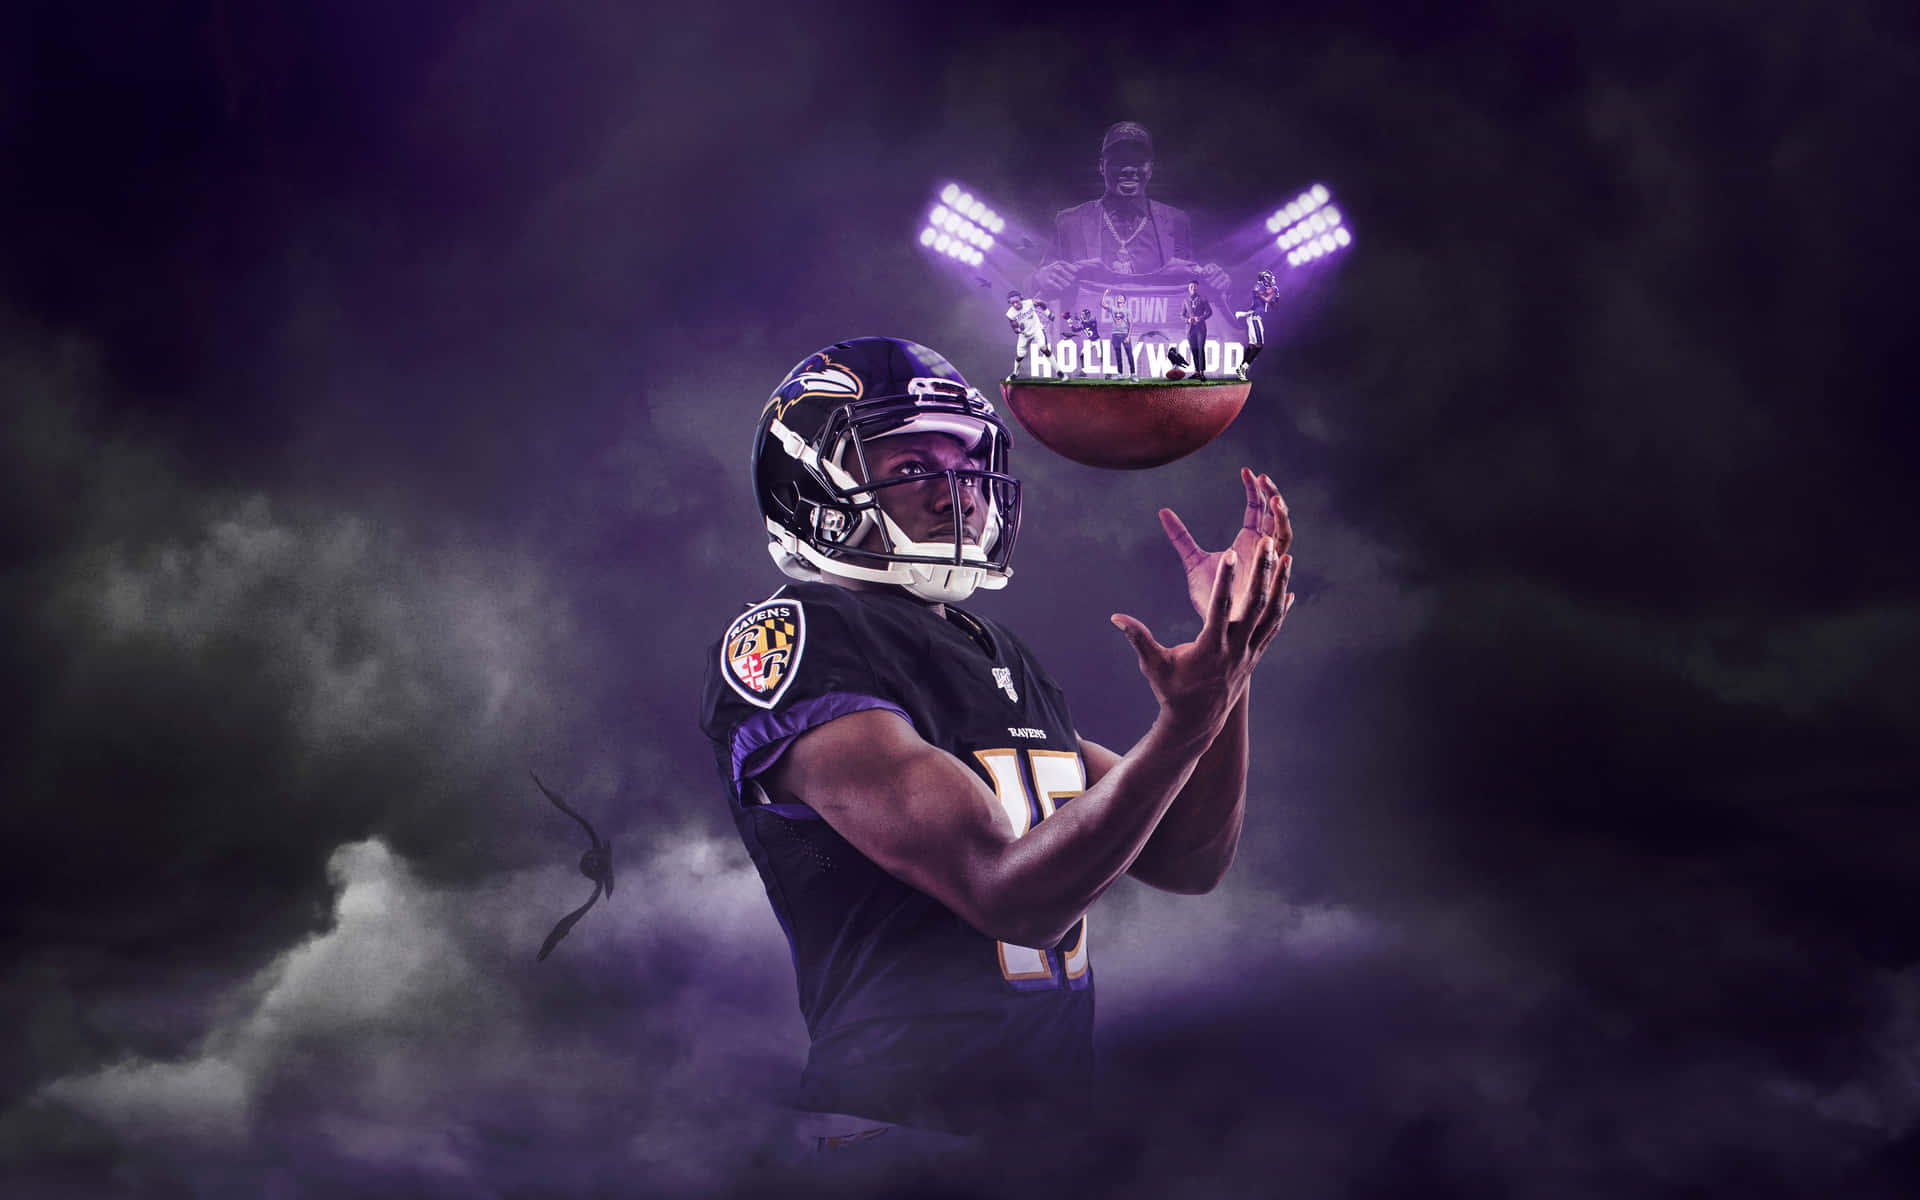 Show your spirit for the Baltimore Ravens with this vibrant wallpaper